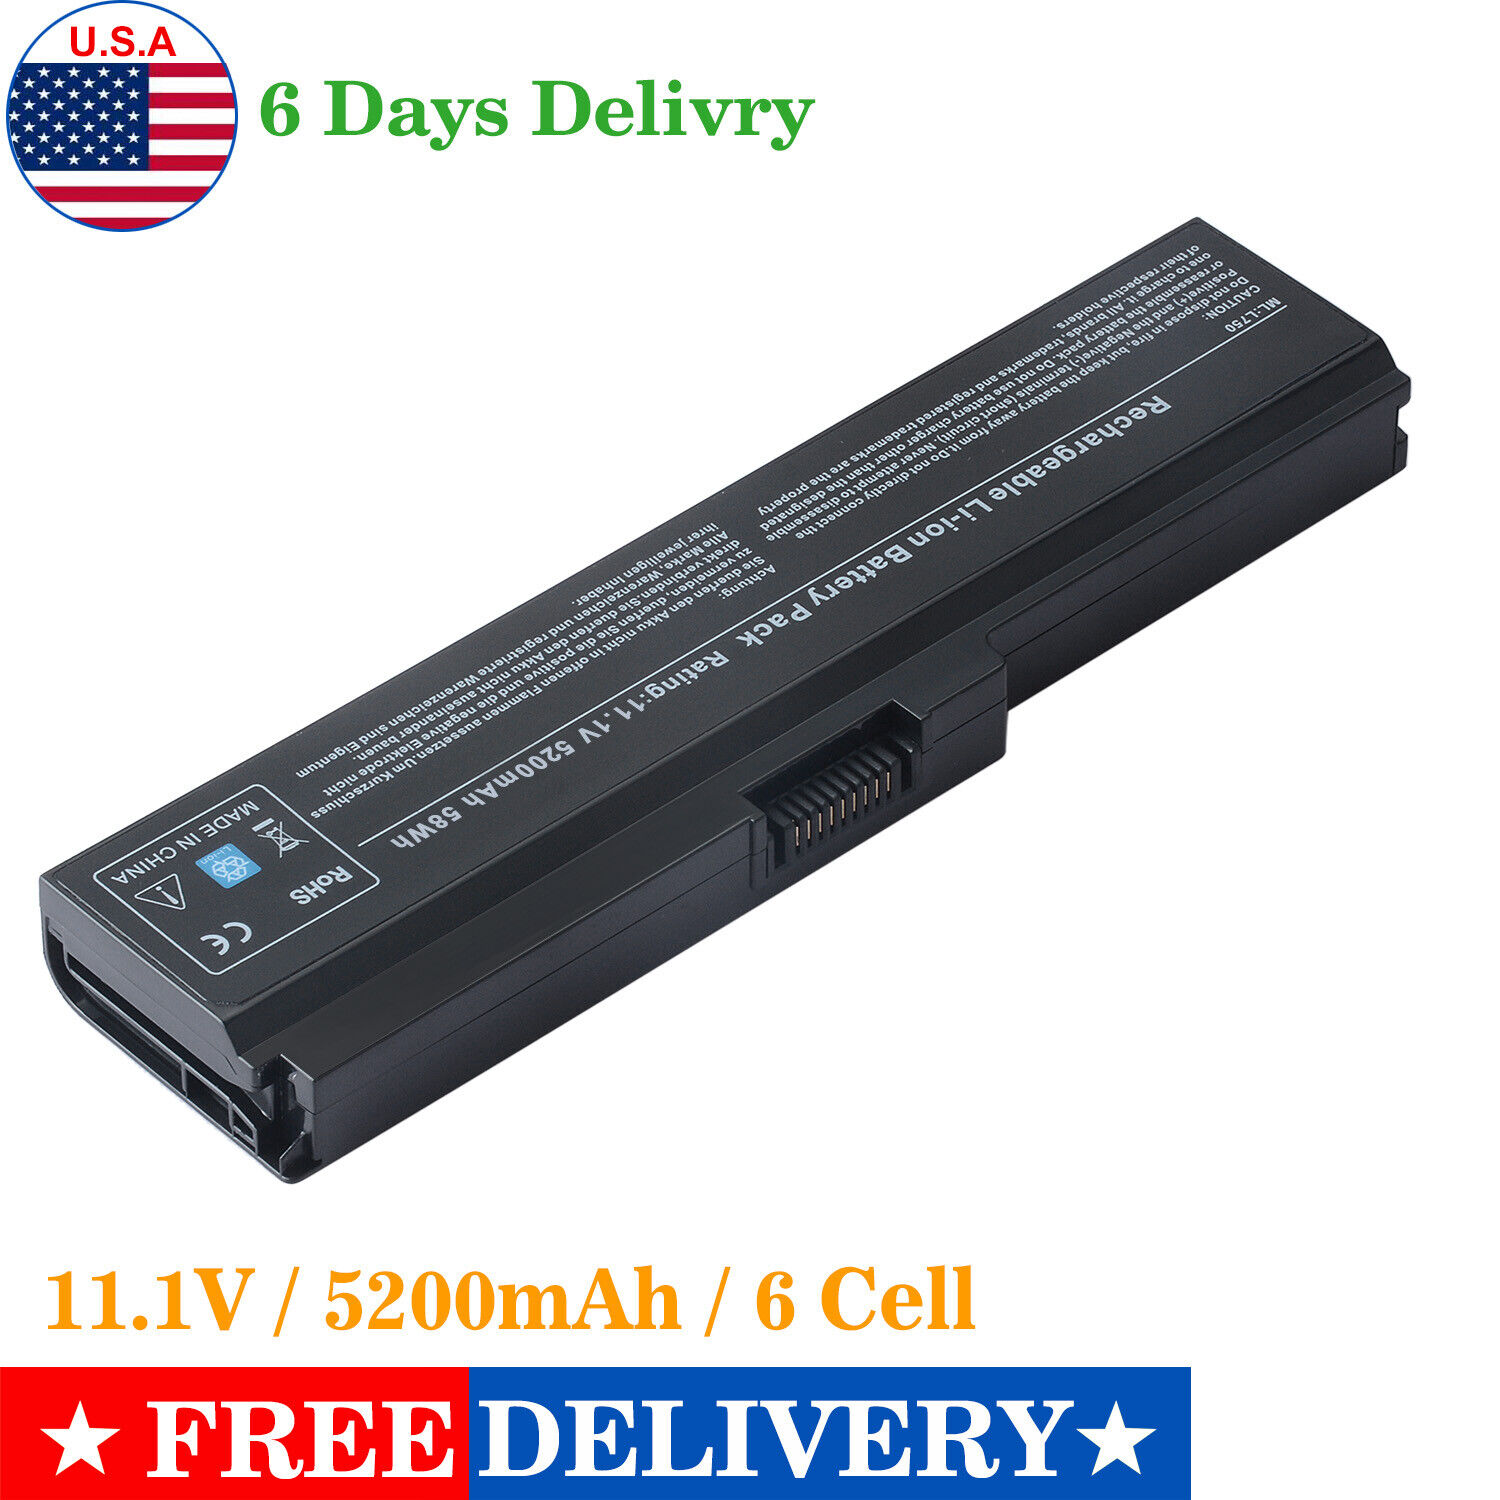 Battery For Toshiba Satellite A660 C655-S5049 C655-S5082 C655-S5128 C655-S5212